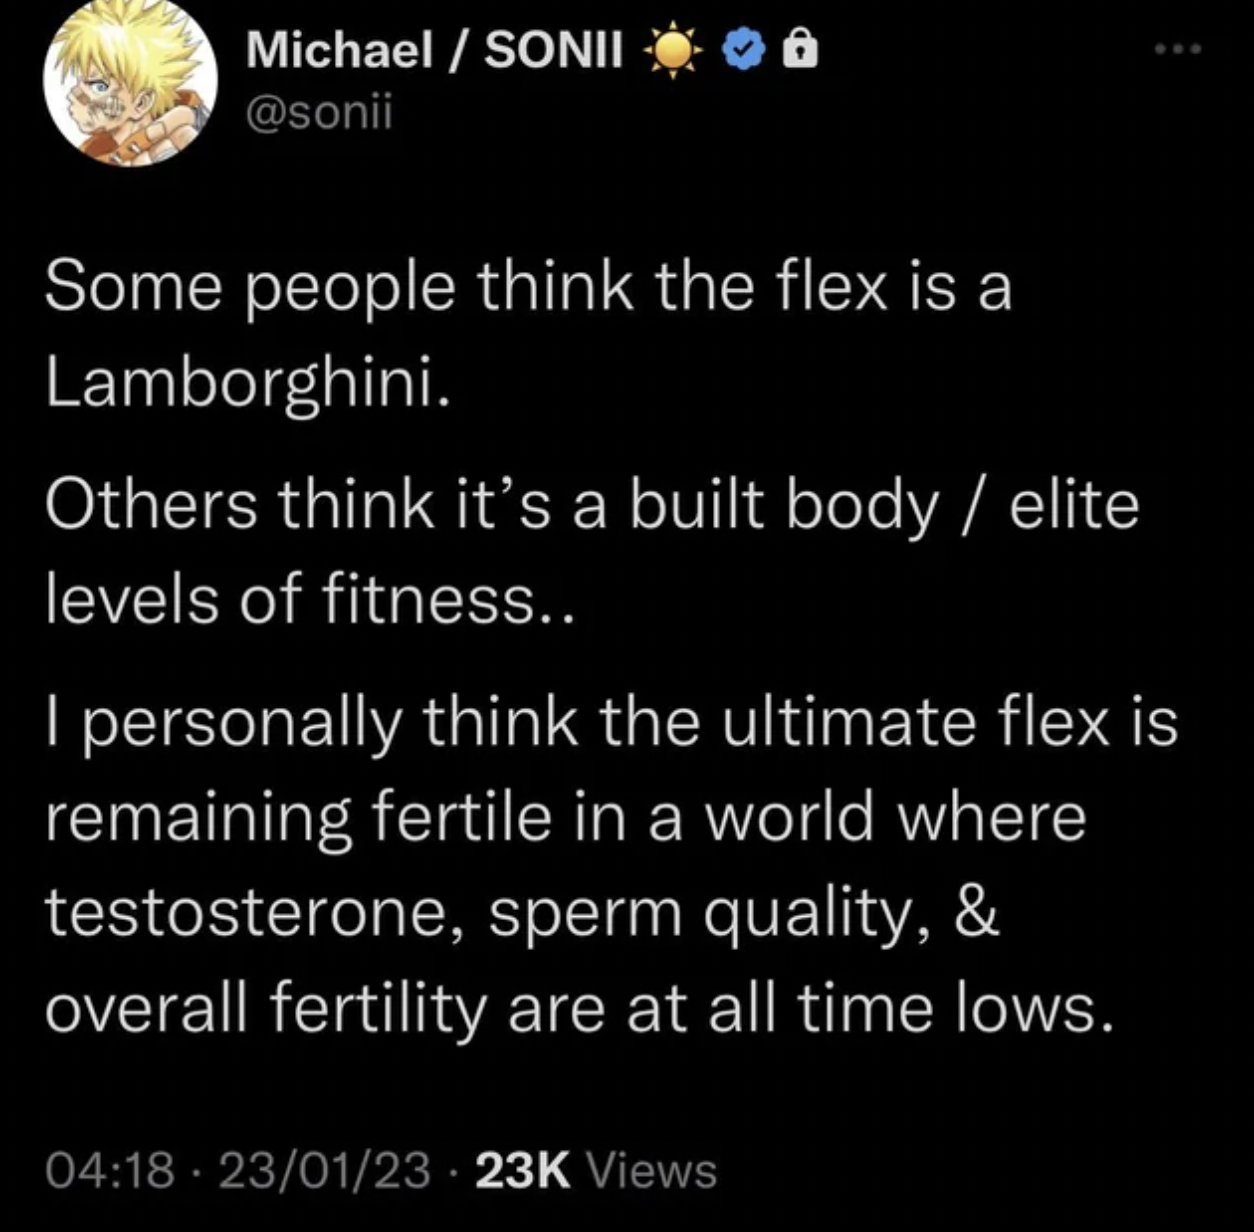 obi wan kenobi star wars tumblr posts -Some people think the flex is a Lamborghini. Others think it's a built body elite levels of fitness.. I personally think the ultimate flex is remaining fertile in a world where testosterone, sperm quality, & overall 